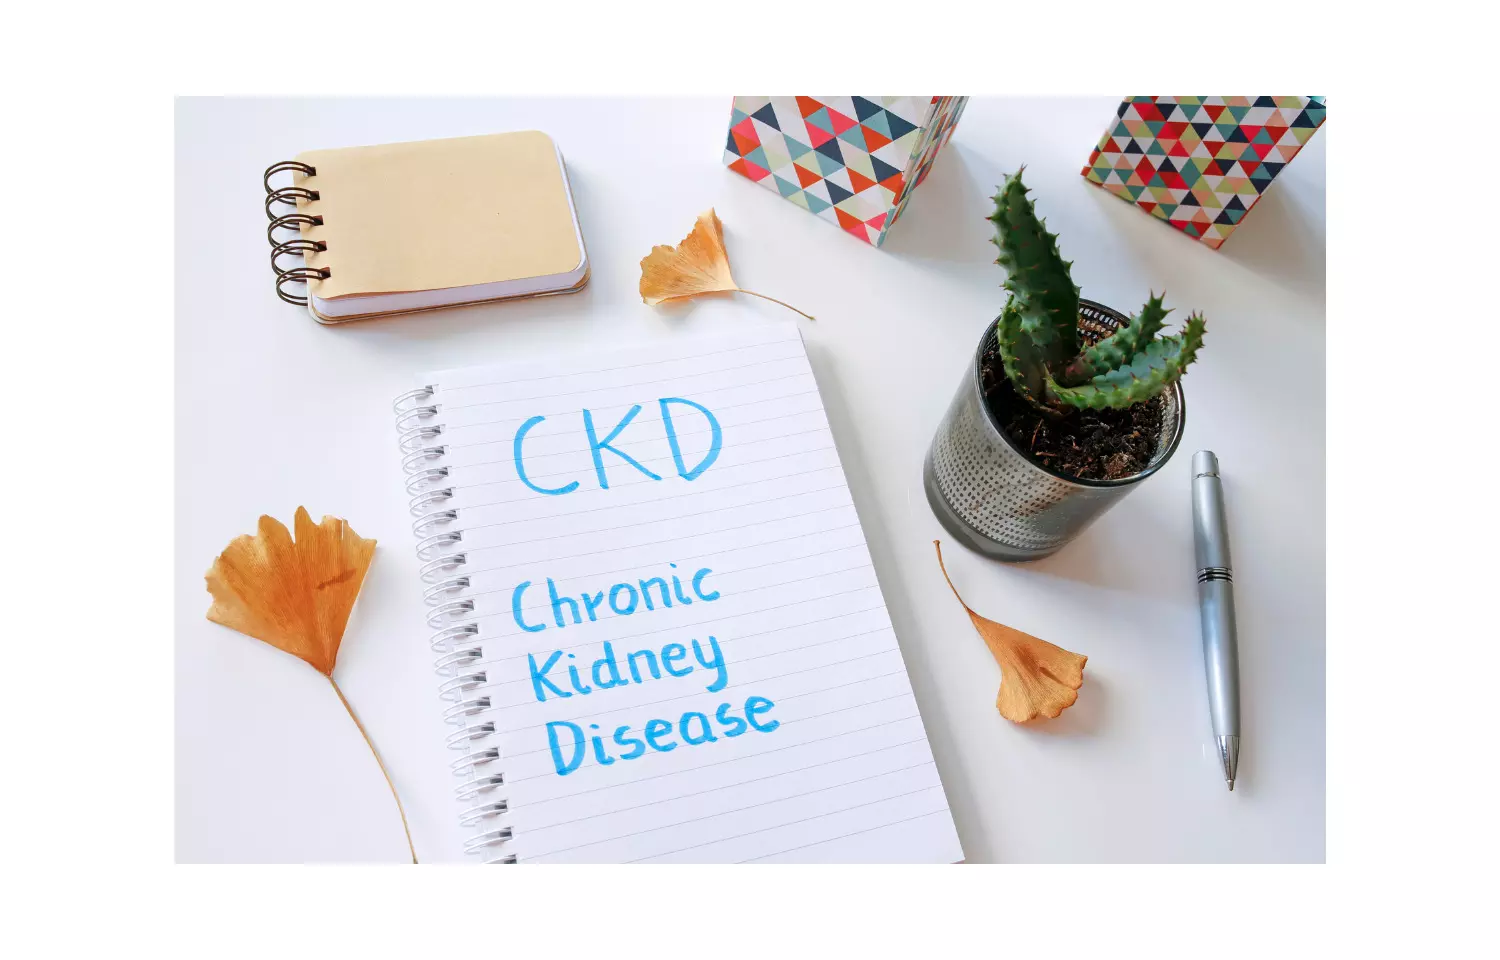 Bariatric surgery and weight loss halt progression of CKD, finds study